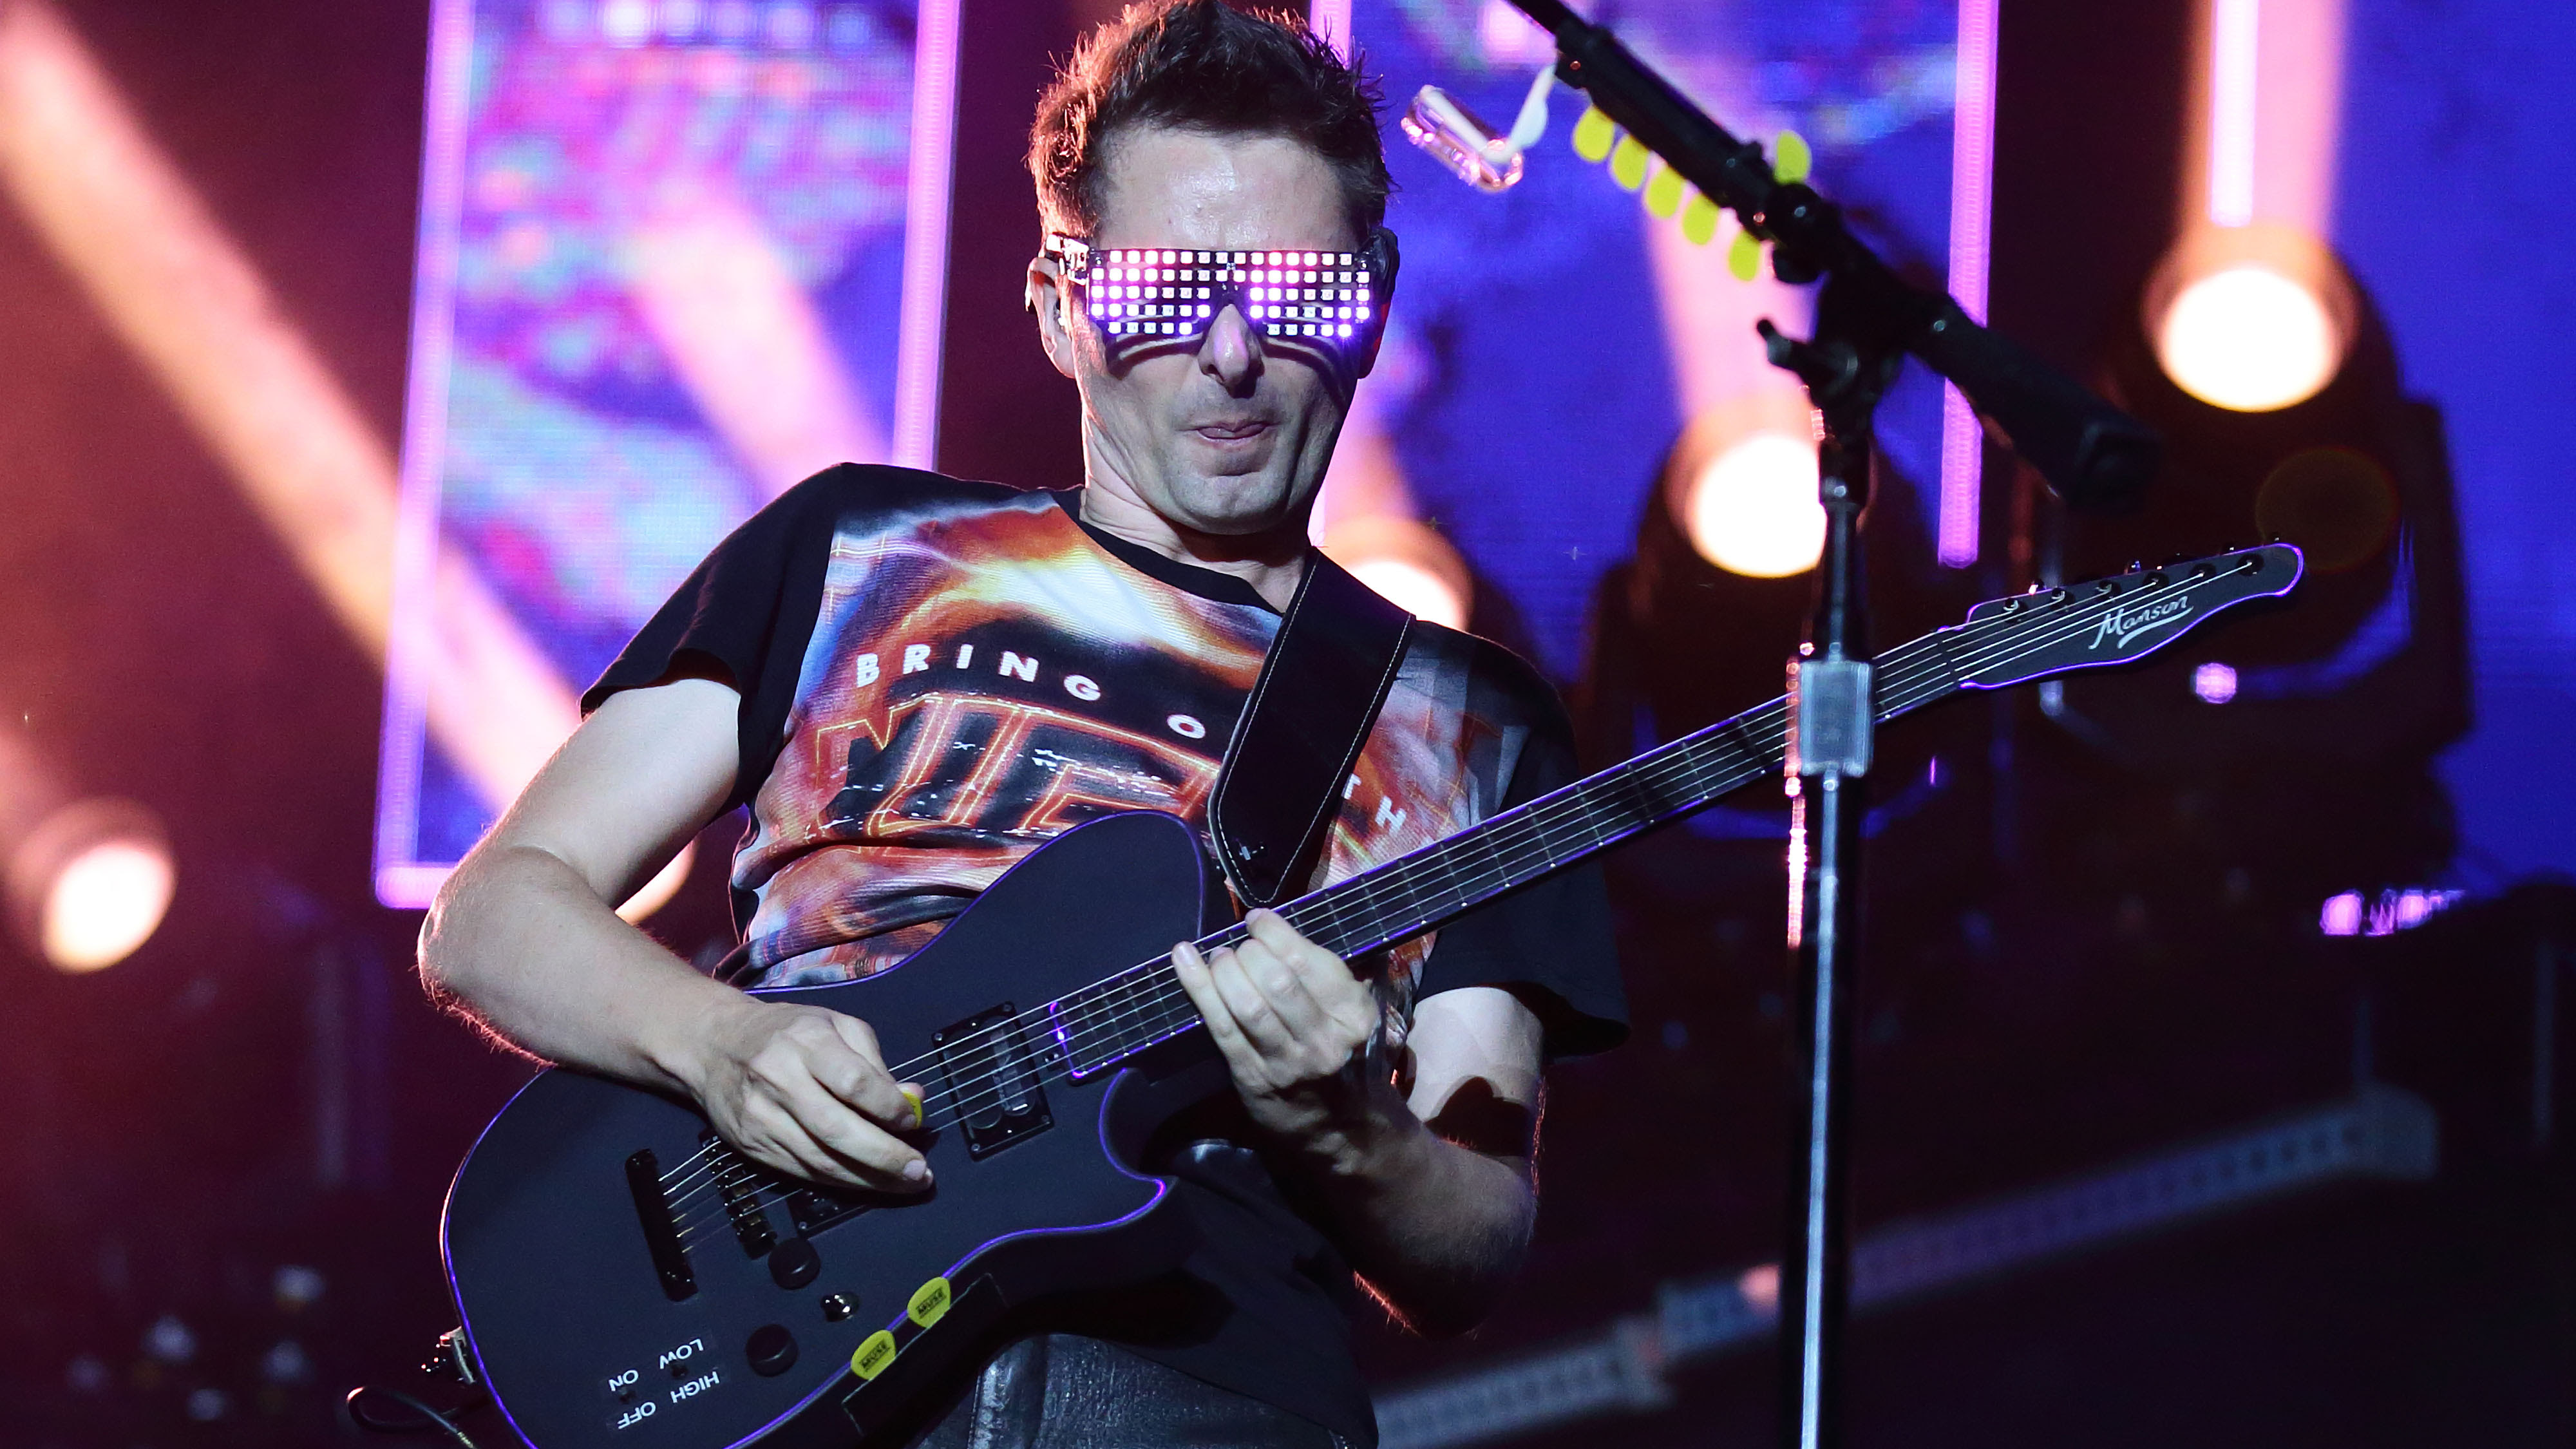 Watch Muse jam Slipknot's Duality at epic Isle of Wight festival show